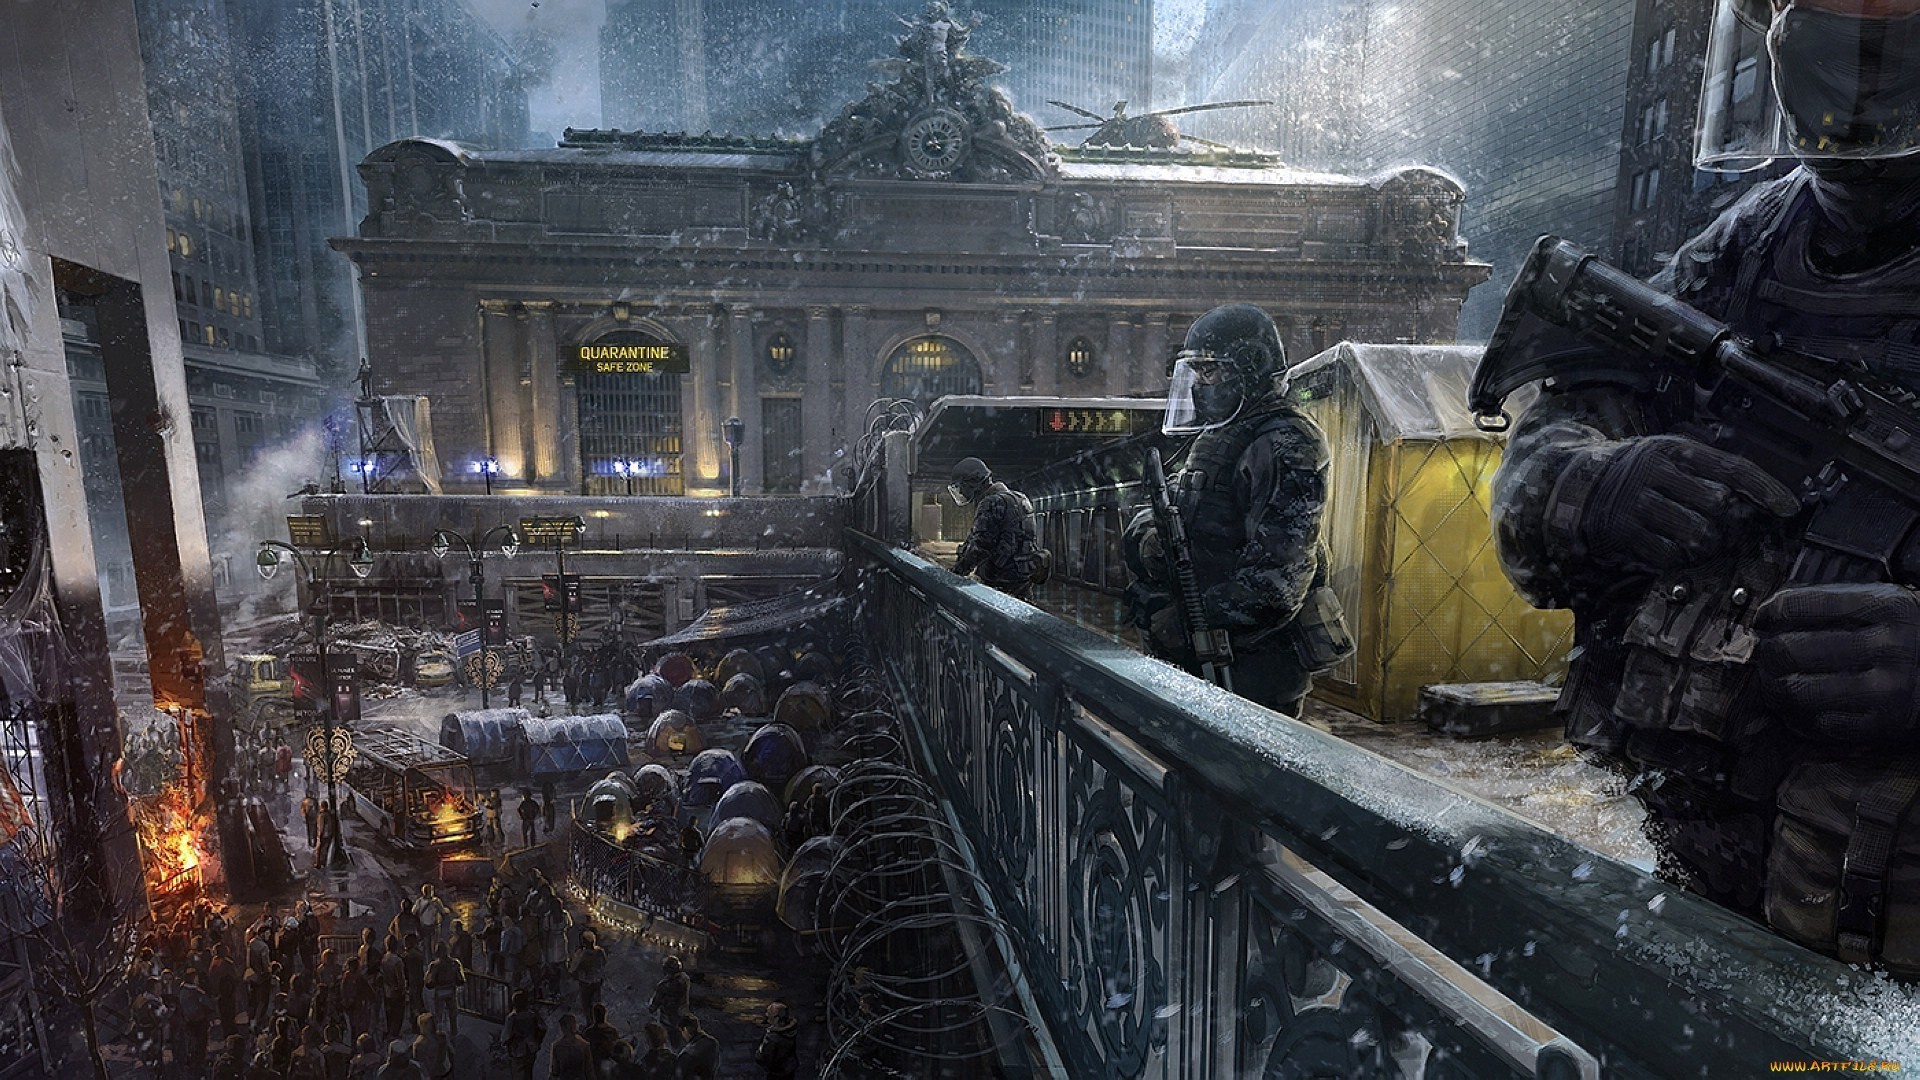 Tom Clancys The Division Apocalyptic Computer Game Concept Art Video Games 1920x1080